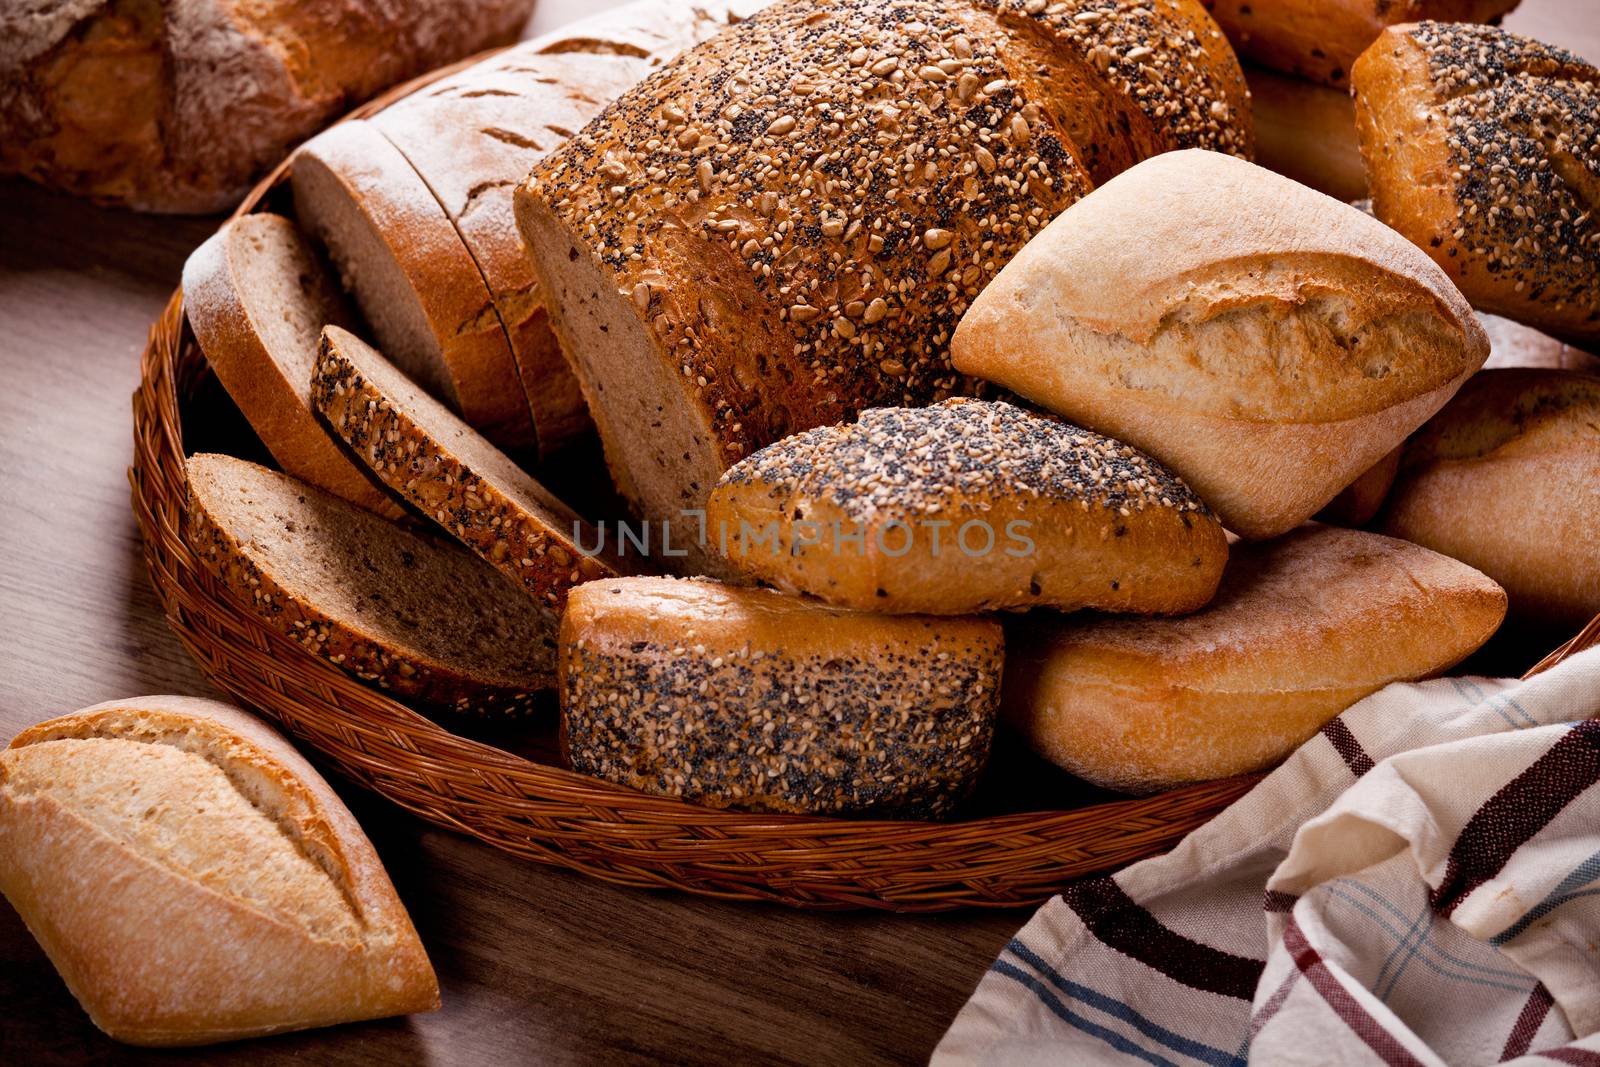 Display Of A Variety Of Breads In A Basket by mpessaris